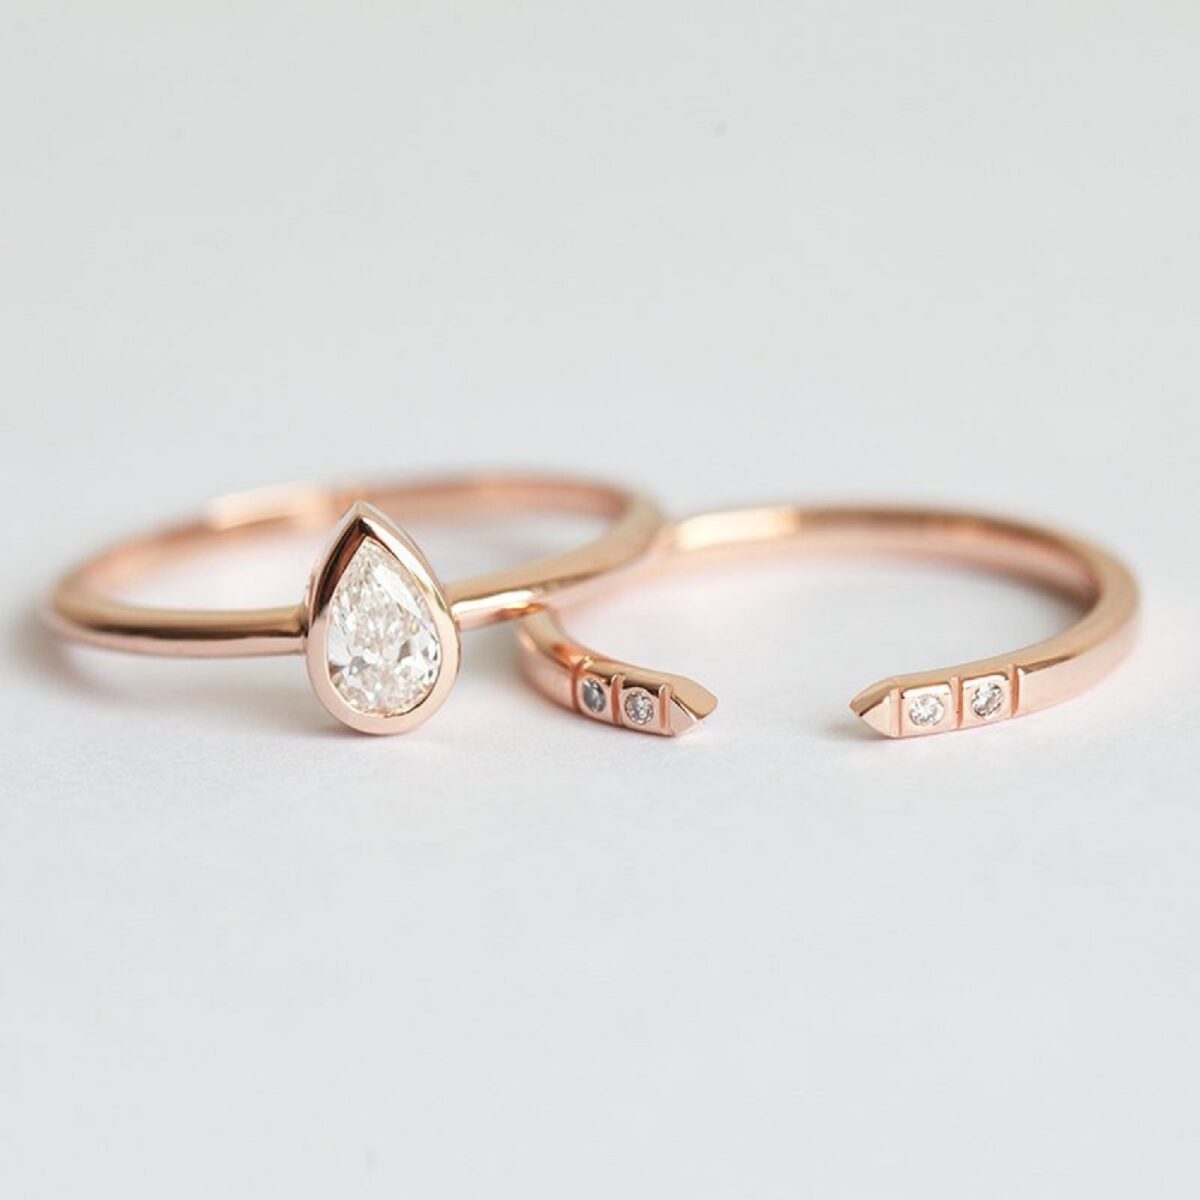 Minimal style pear cut lab grown diamond ring with pave set open gap wedding band crafted in solid 14k rose gold.